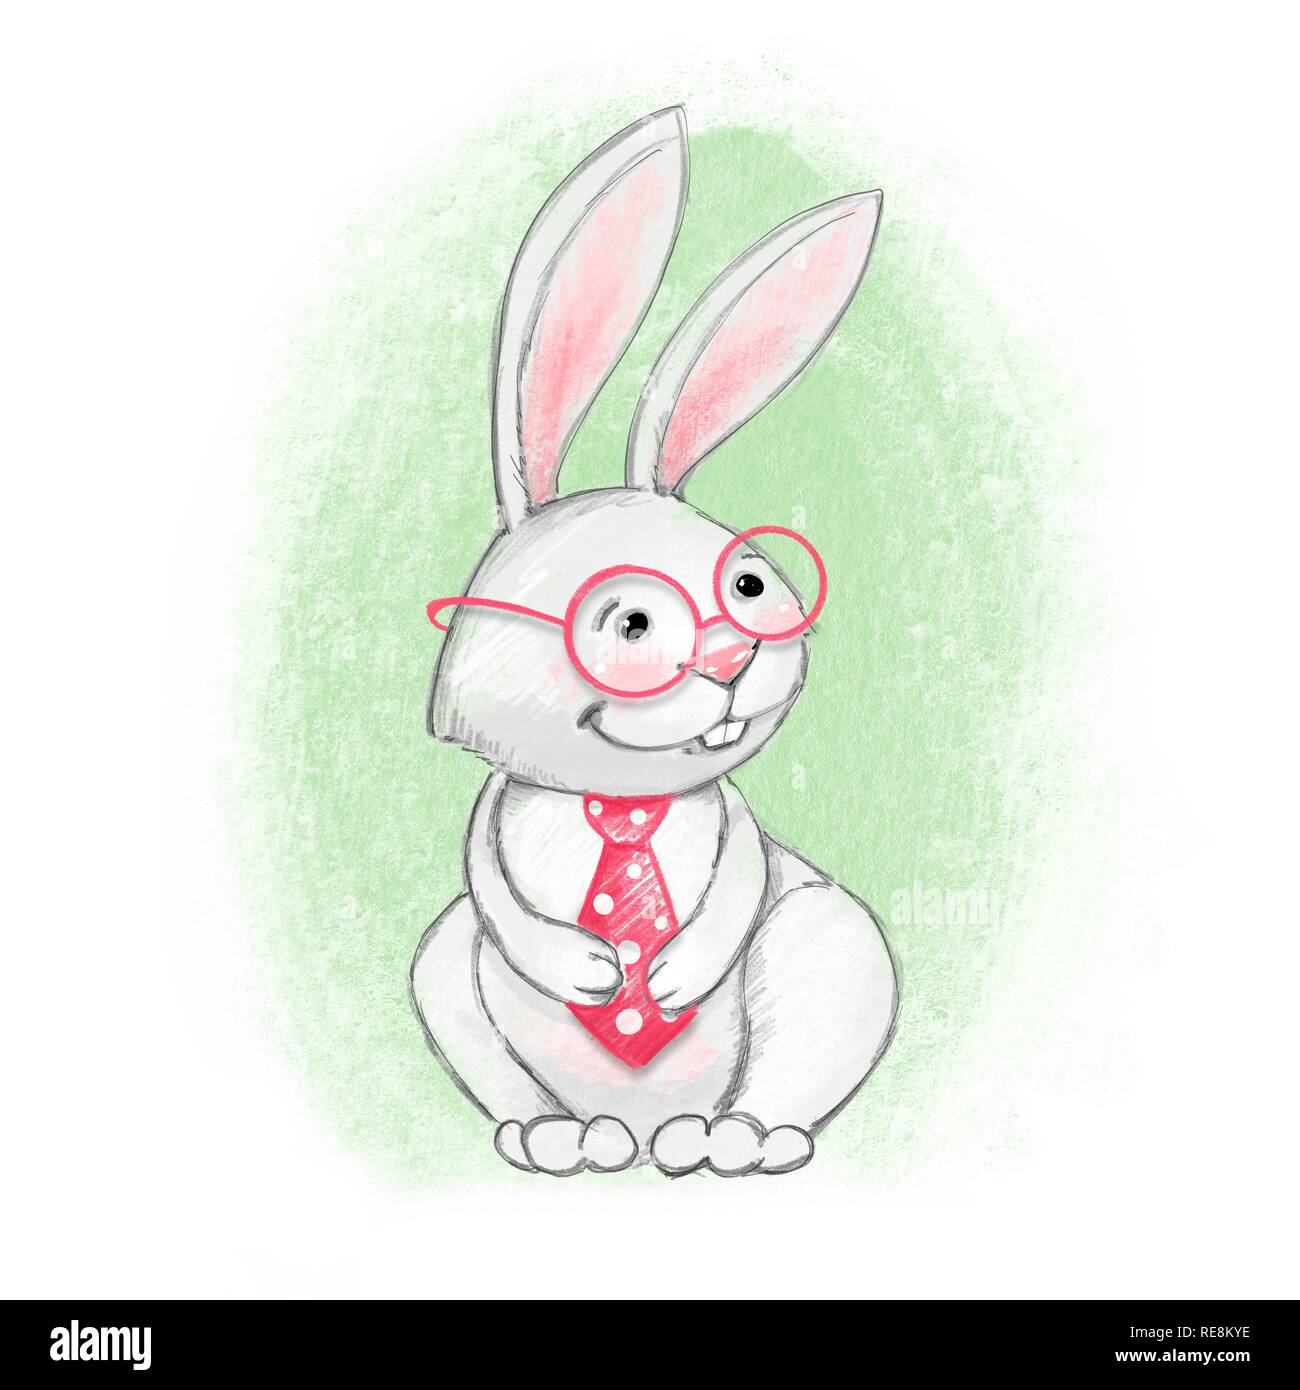 Little bunny. Cute rabbit with glasses Stock Photo